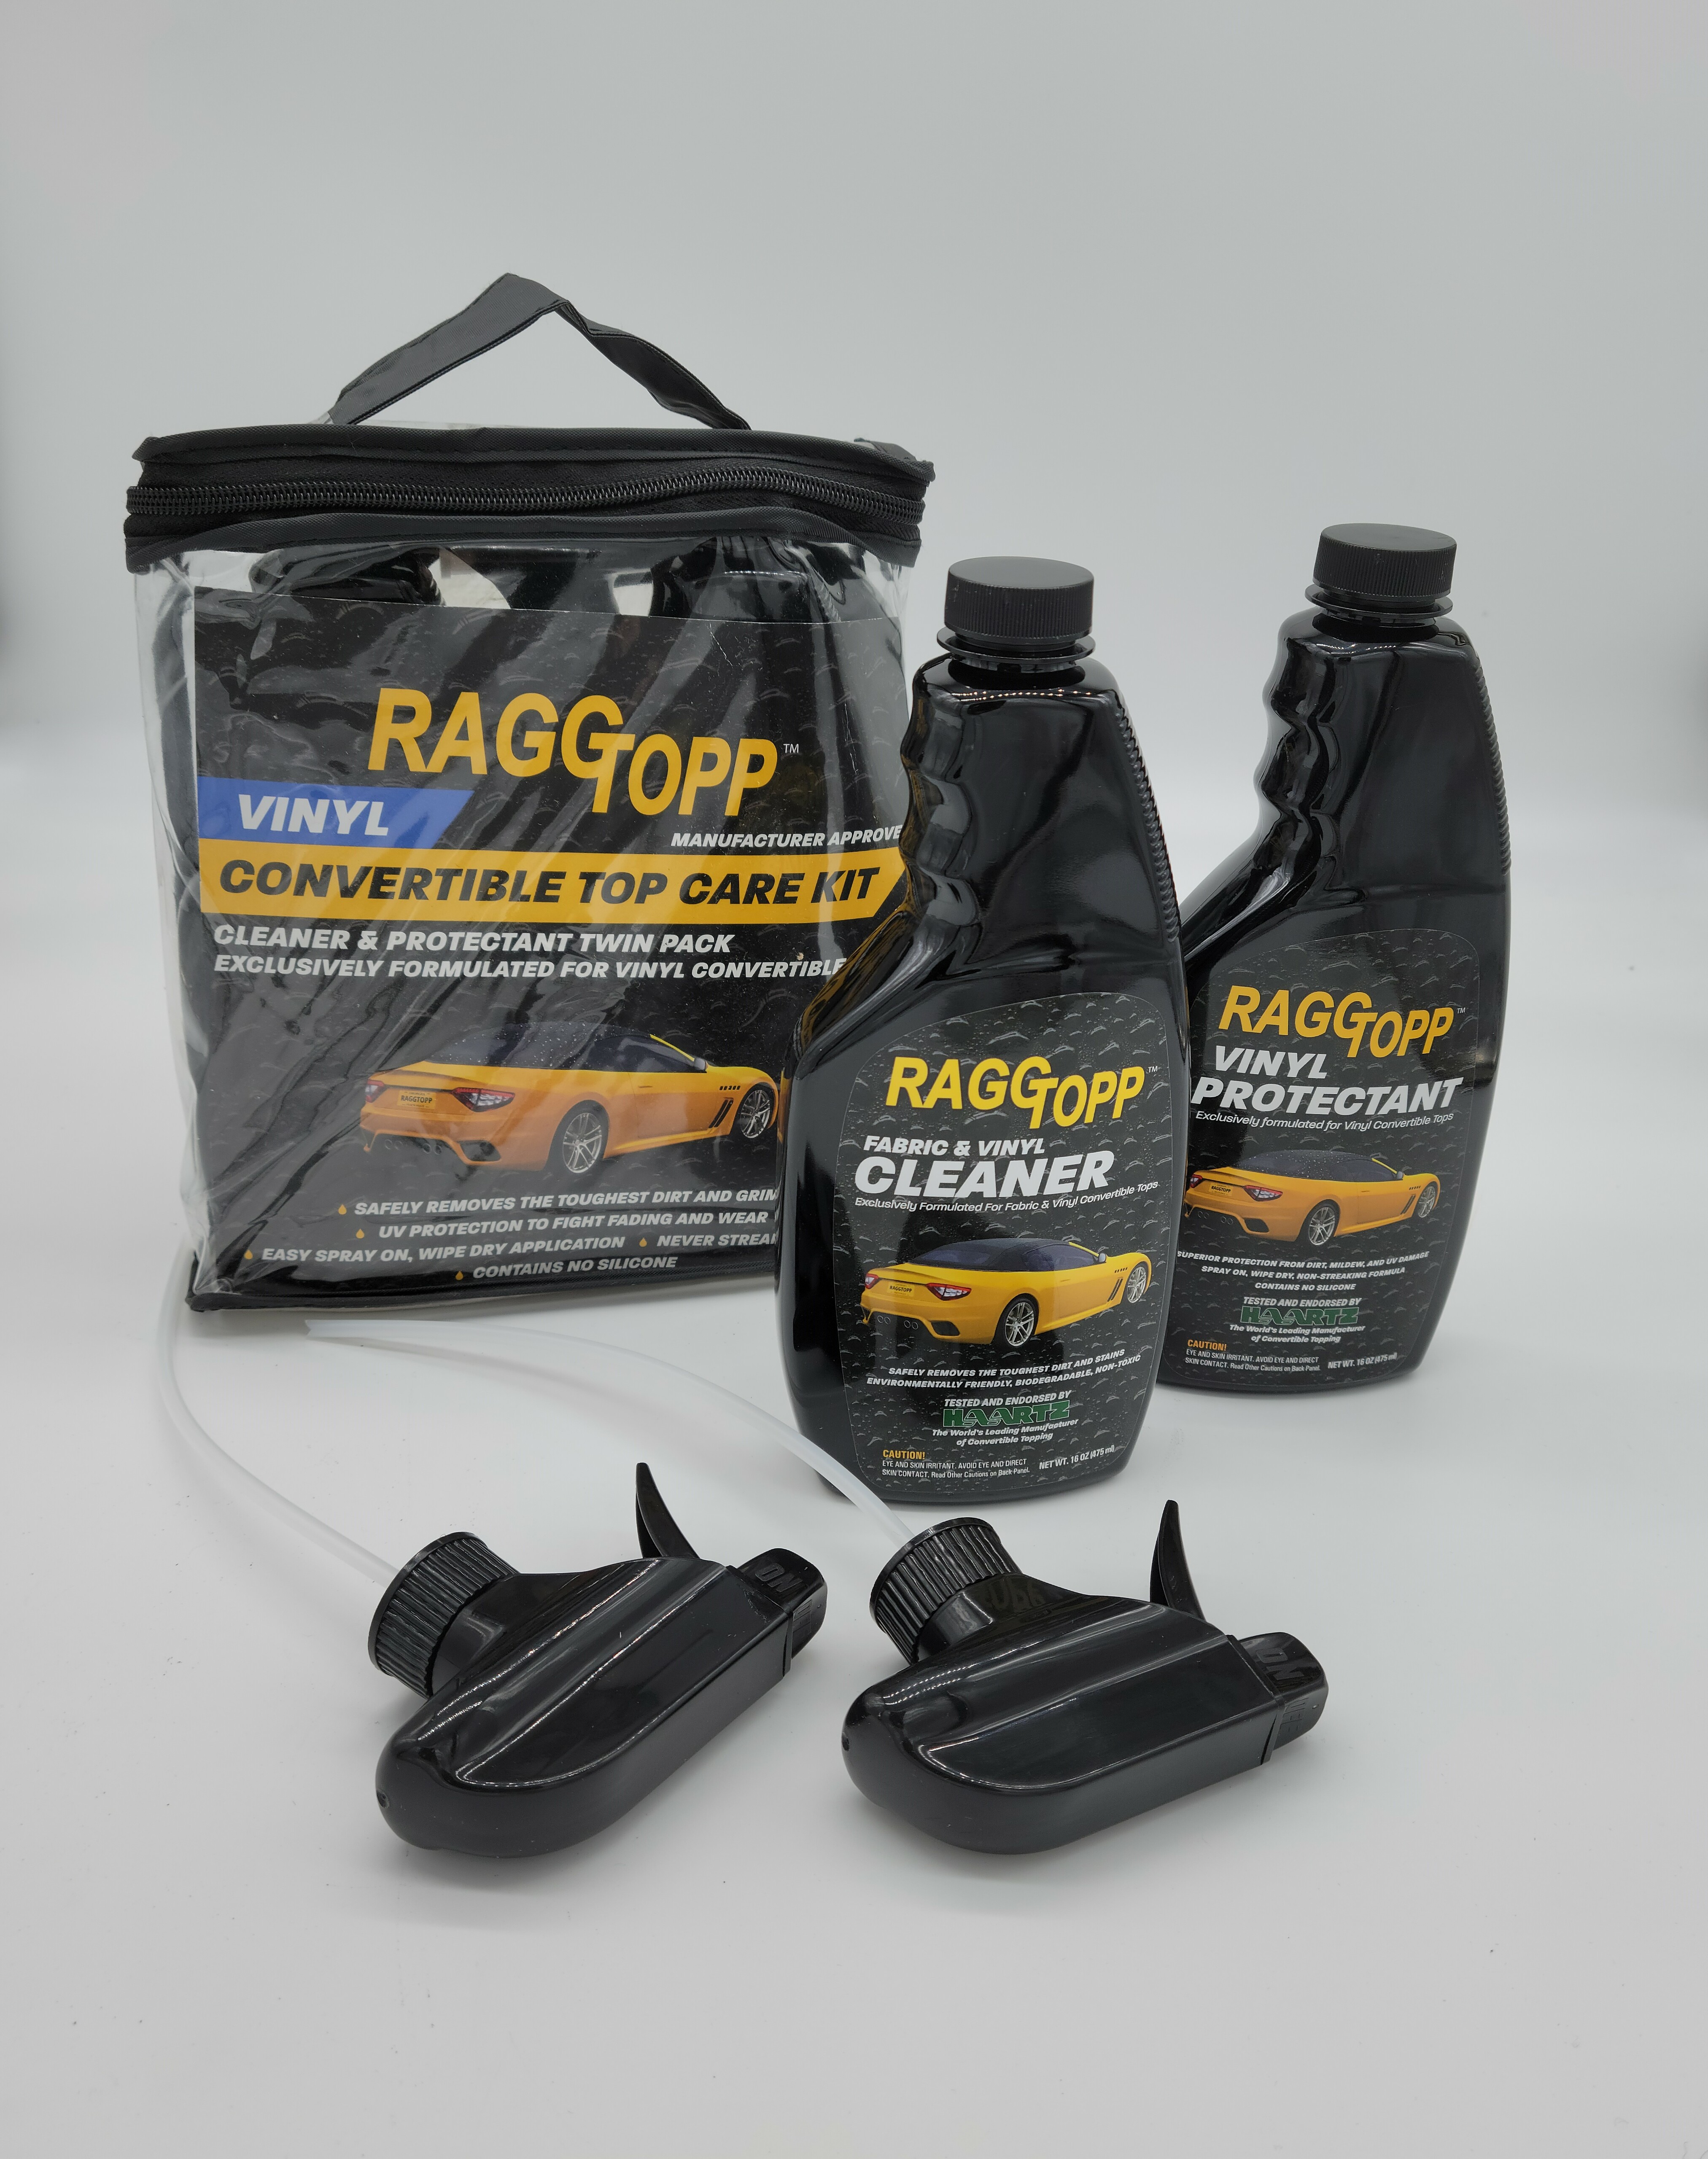 RaggTopp Vinyl Top Cleaner and Protectant for Vinyl Hard and Convertible  Tops - Hydro-E-Lectric